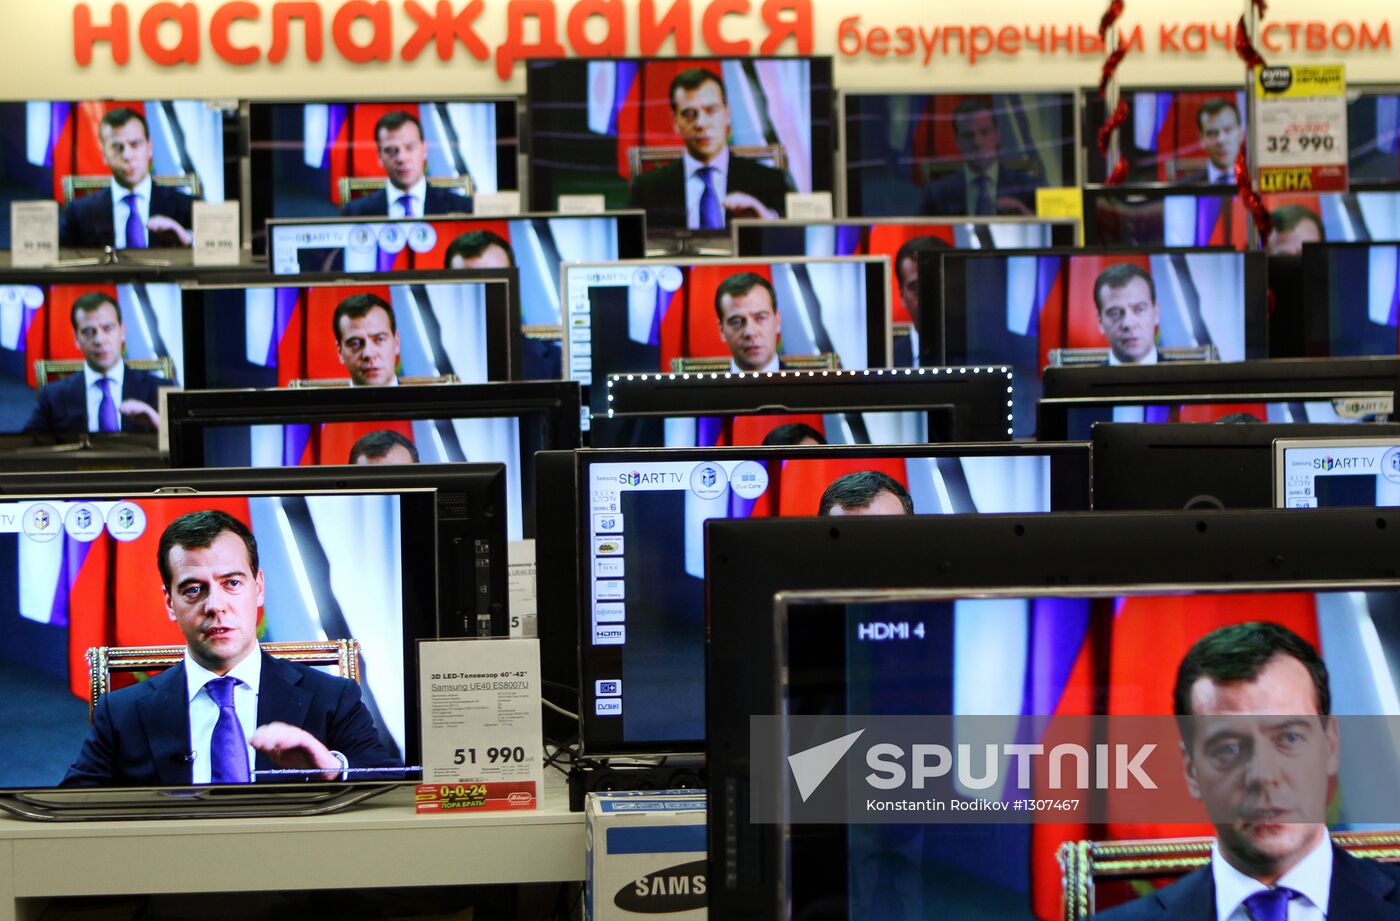 D.Medvedev's live interview to Russian TV channels